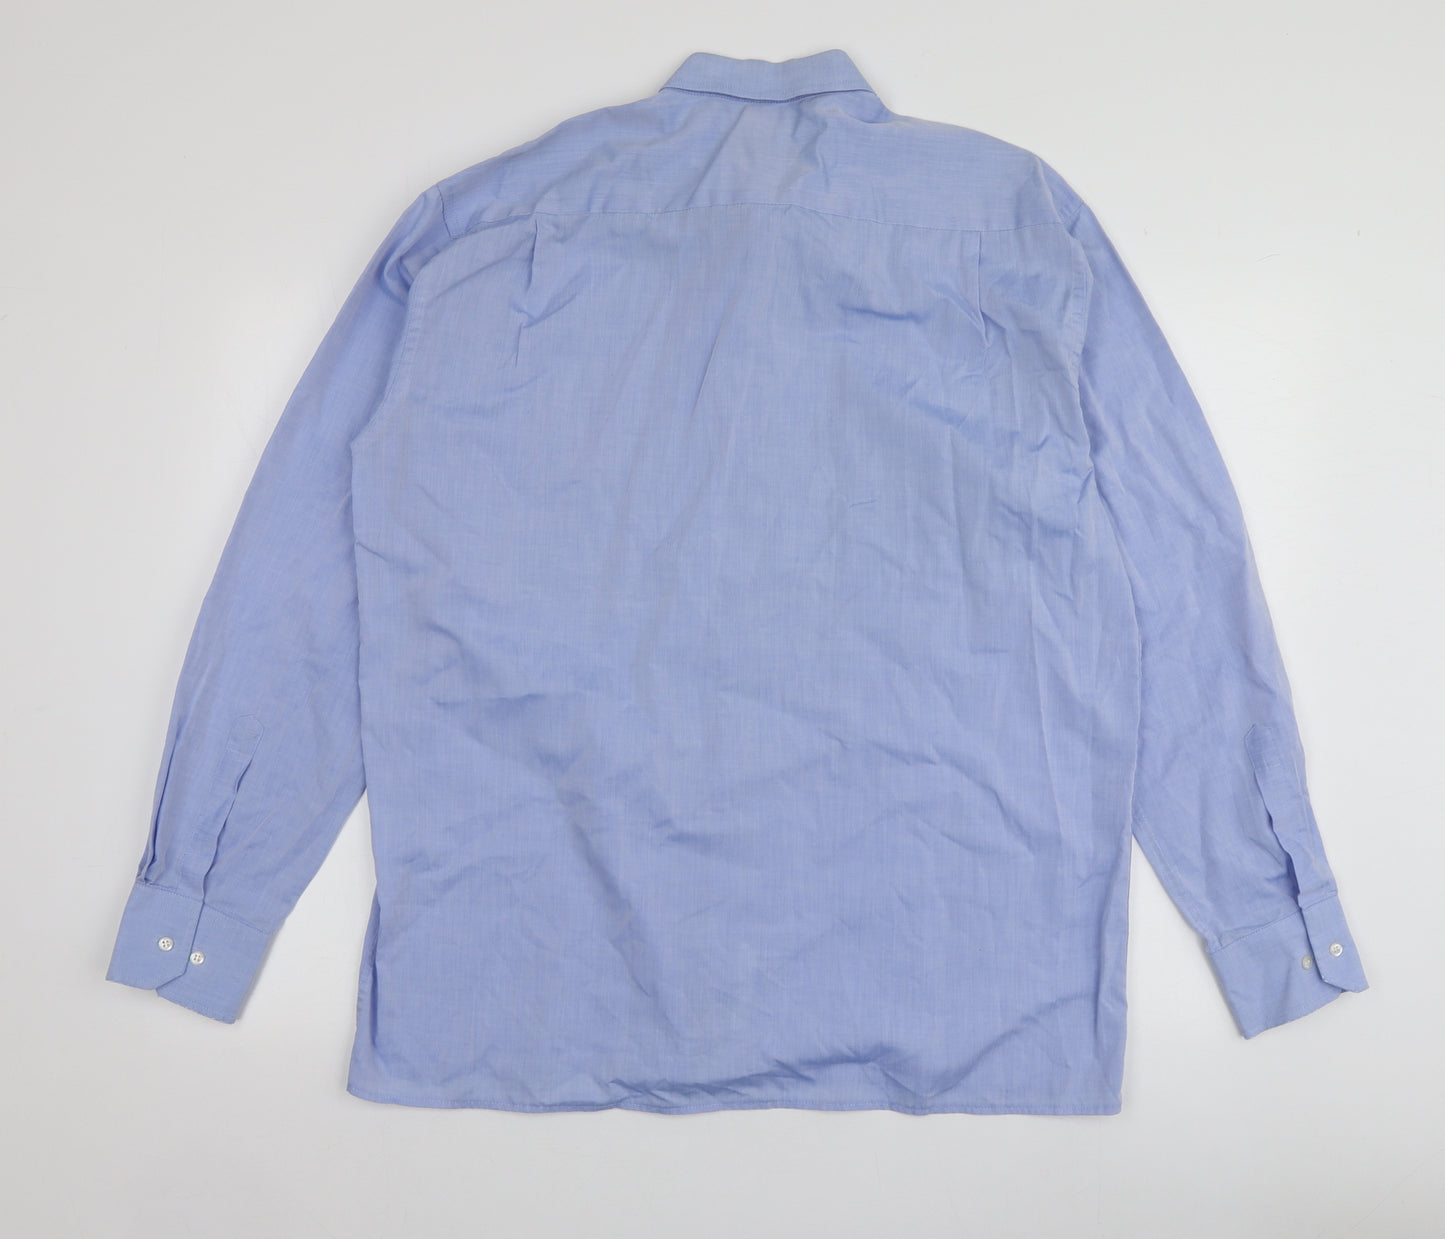 Eterna  Mens Blue  Polyester  Button-Up Size 16 Collared